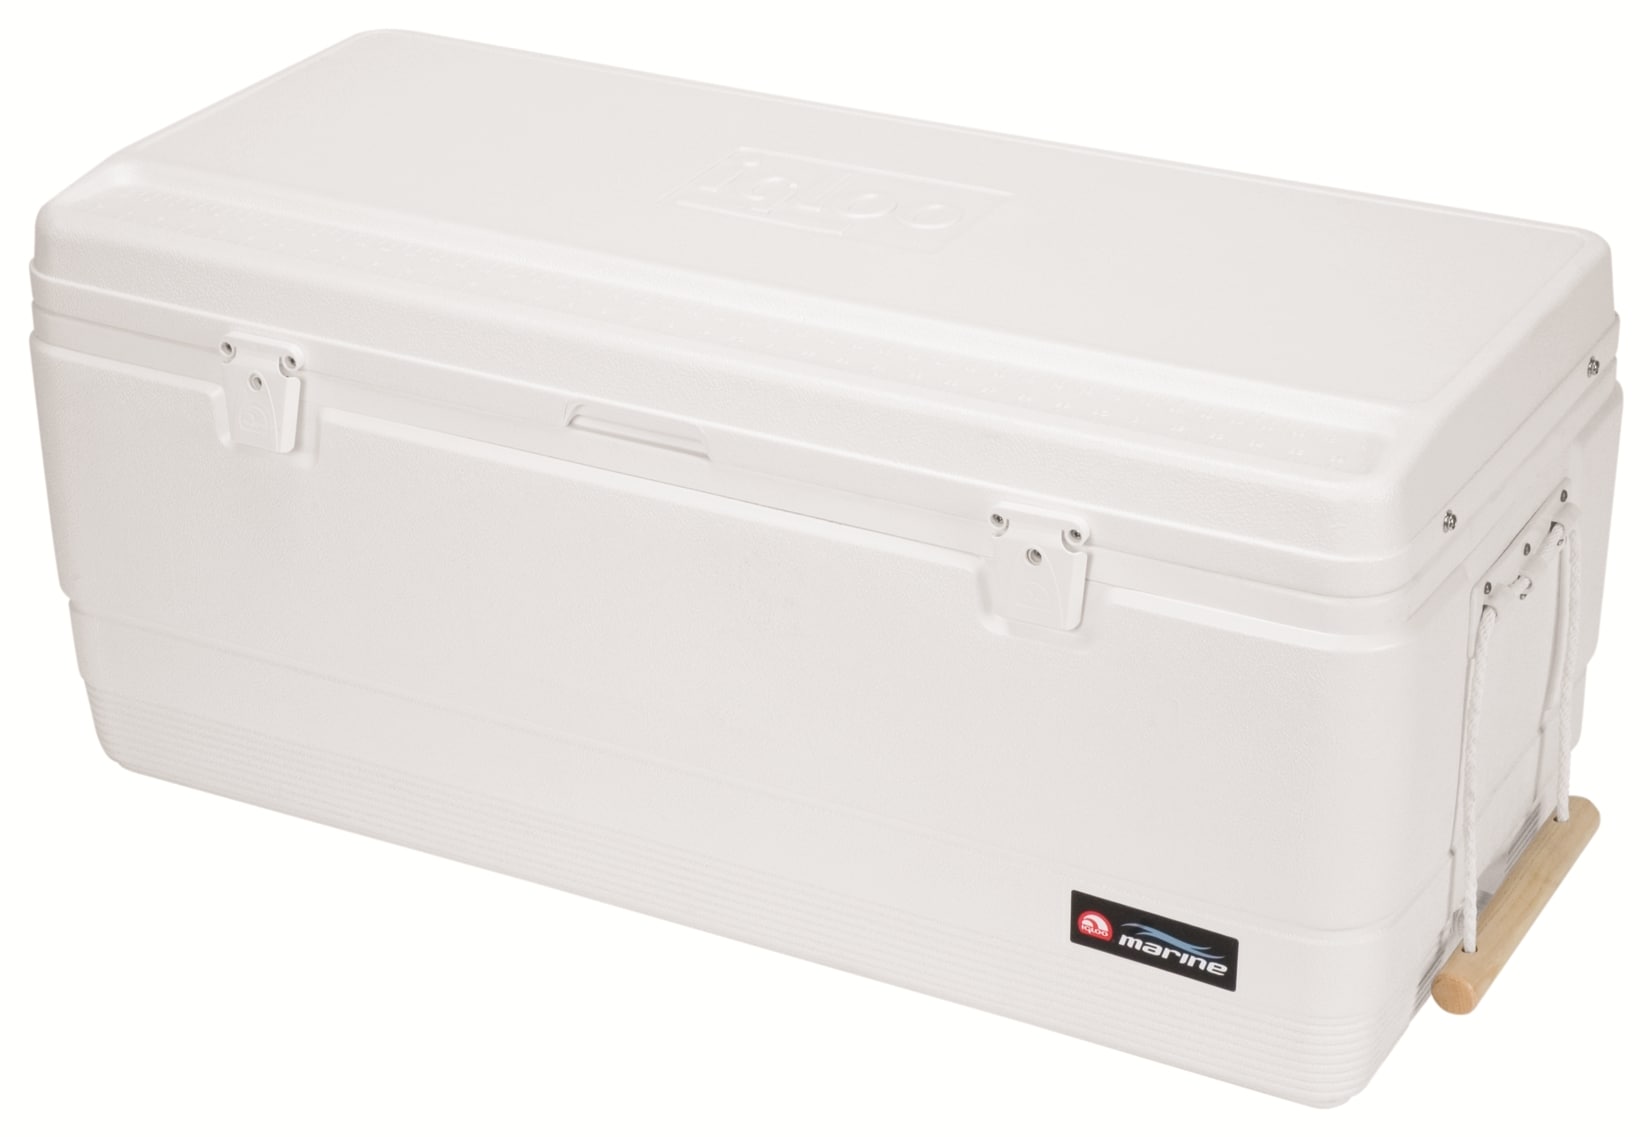 Igloo 128-Quart Insulated Marine Cooler in the Portable Coolers